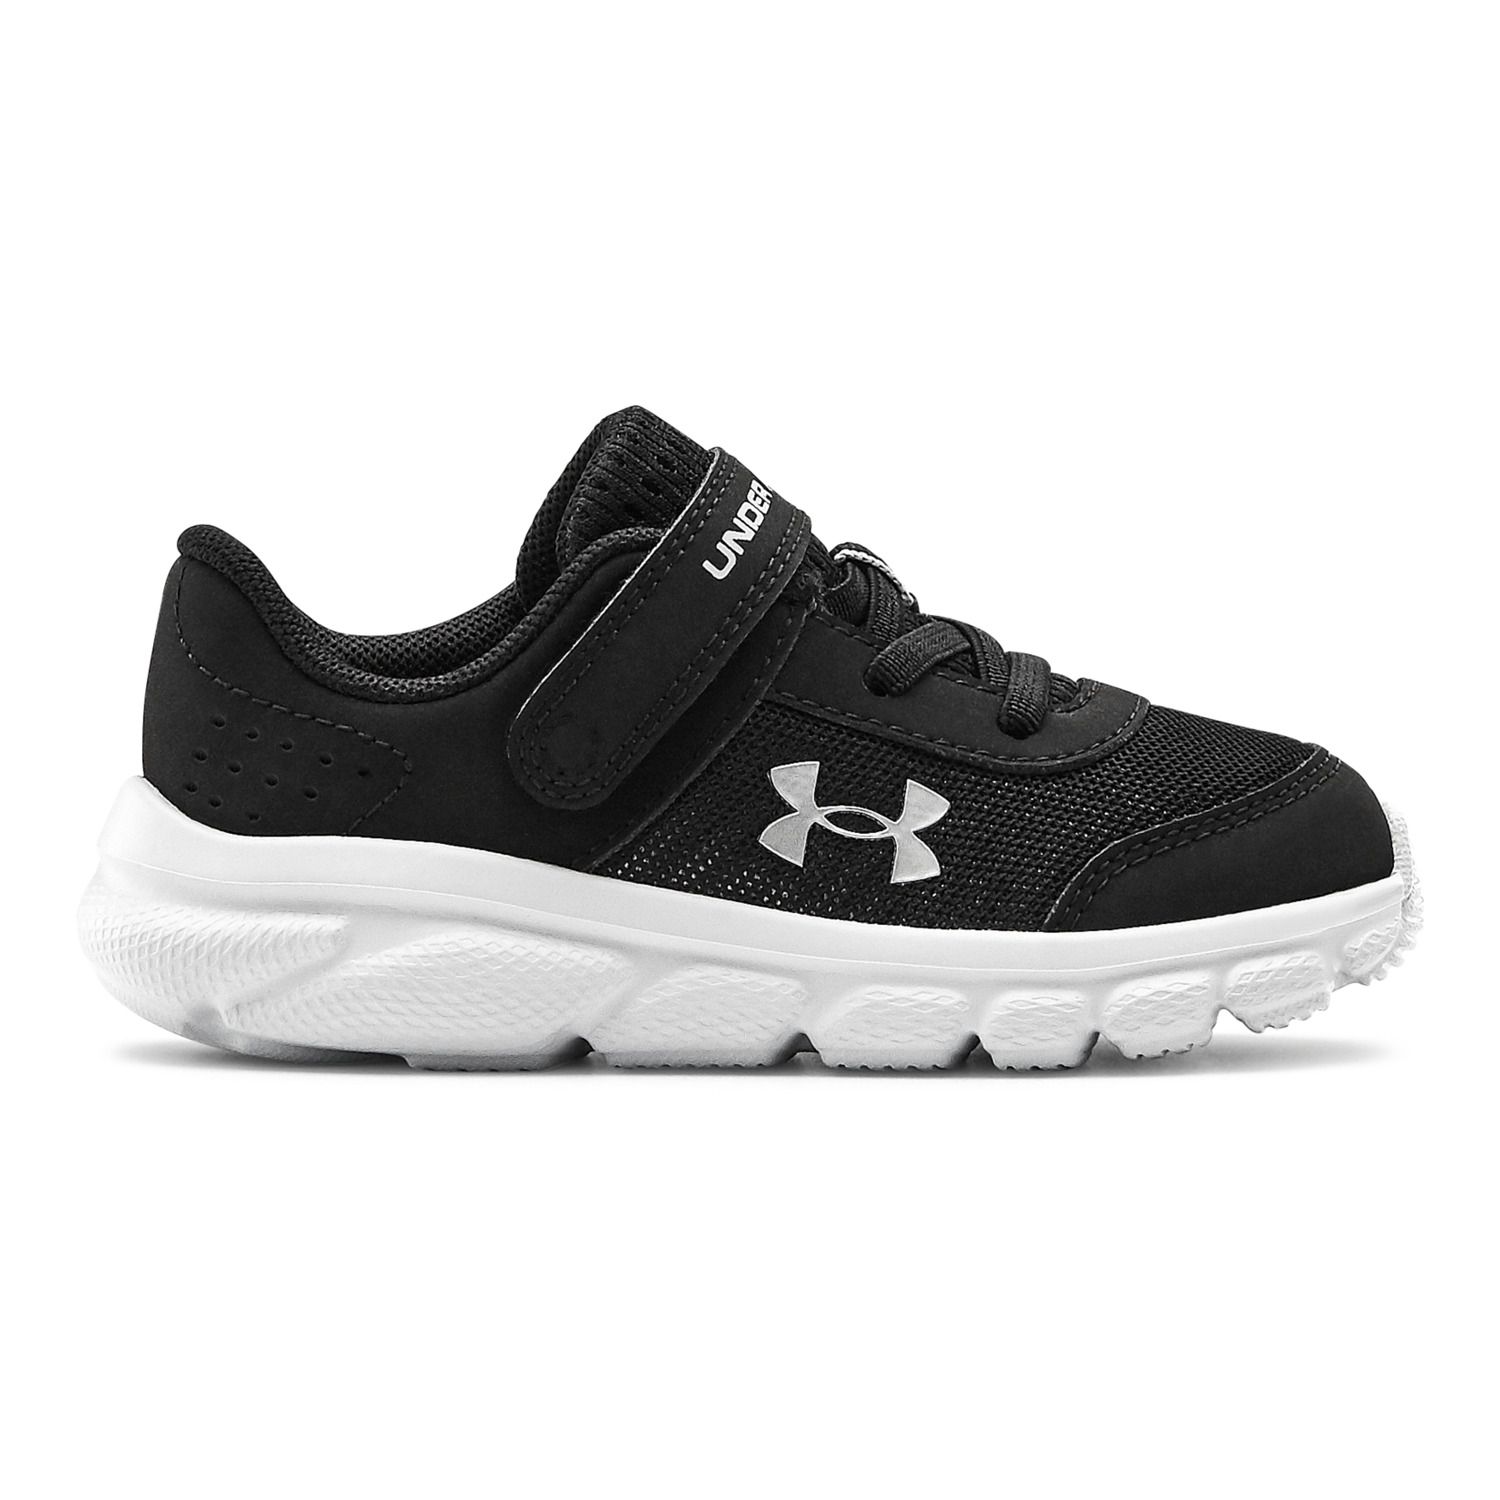 toddler size 8 under armour shoes